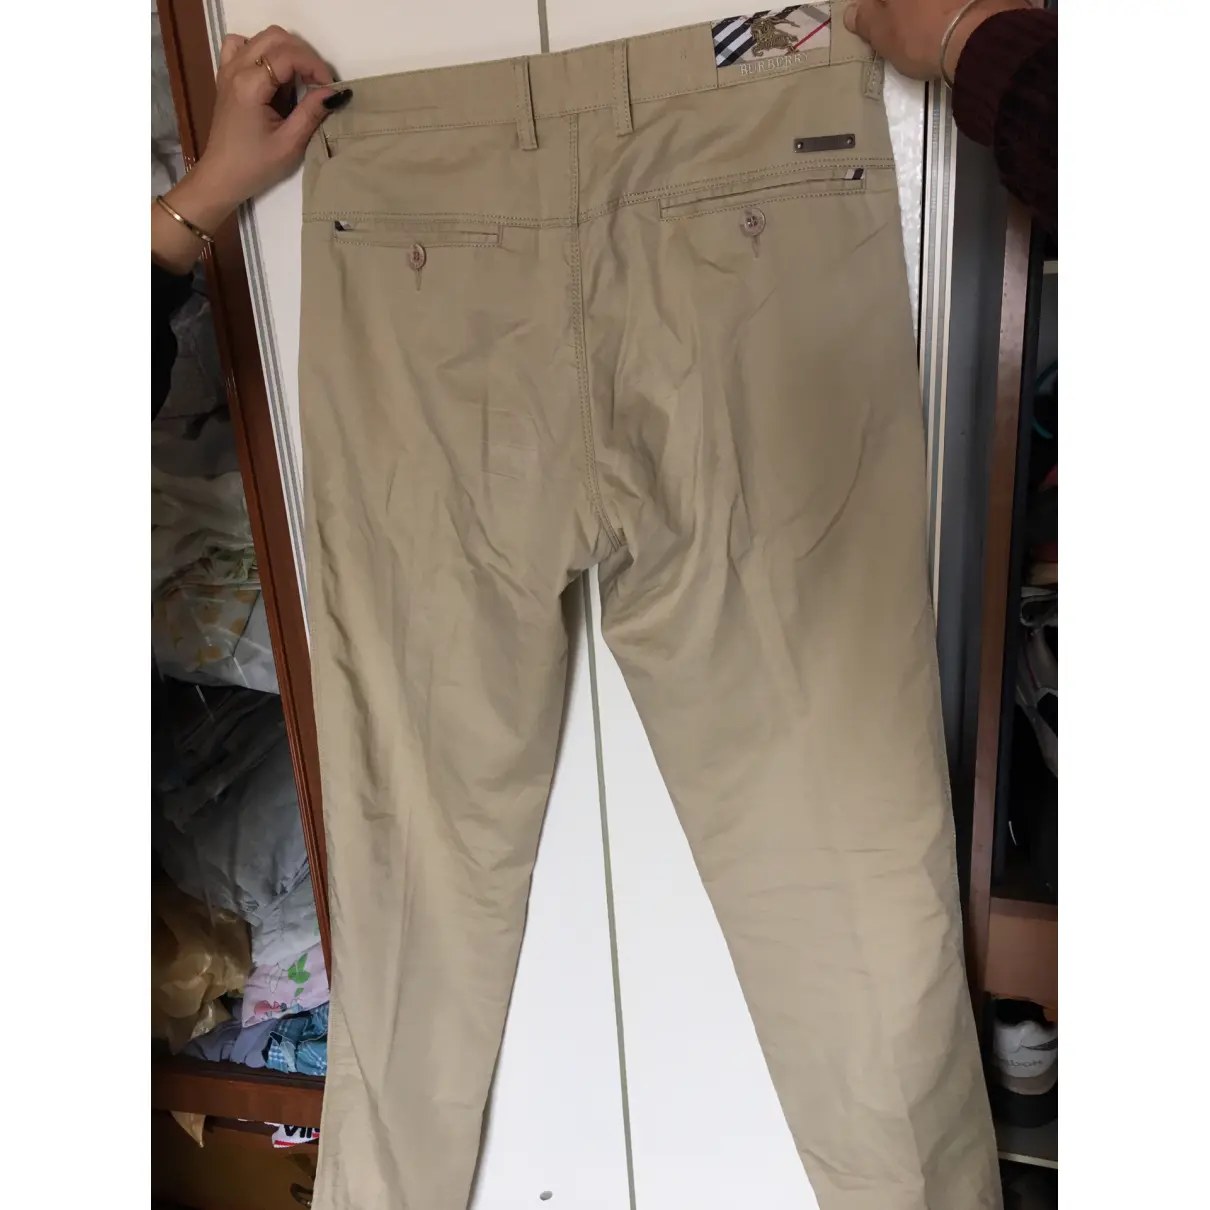 Trousers Burberry - Vintage